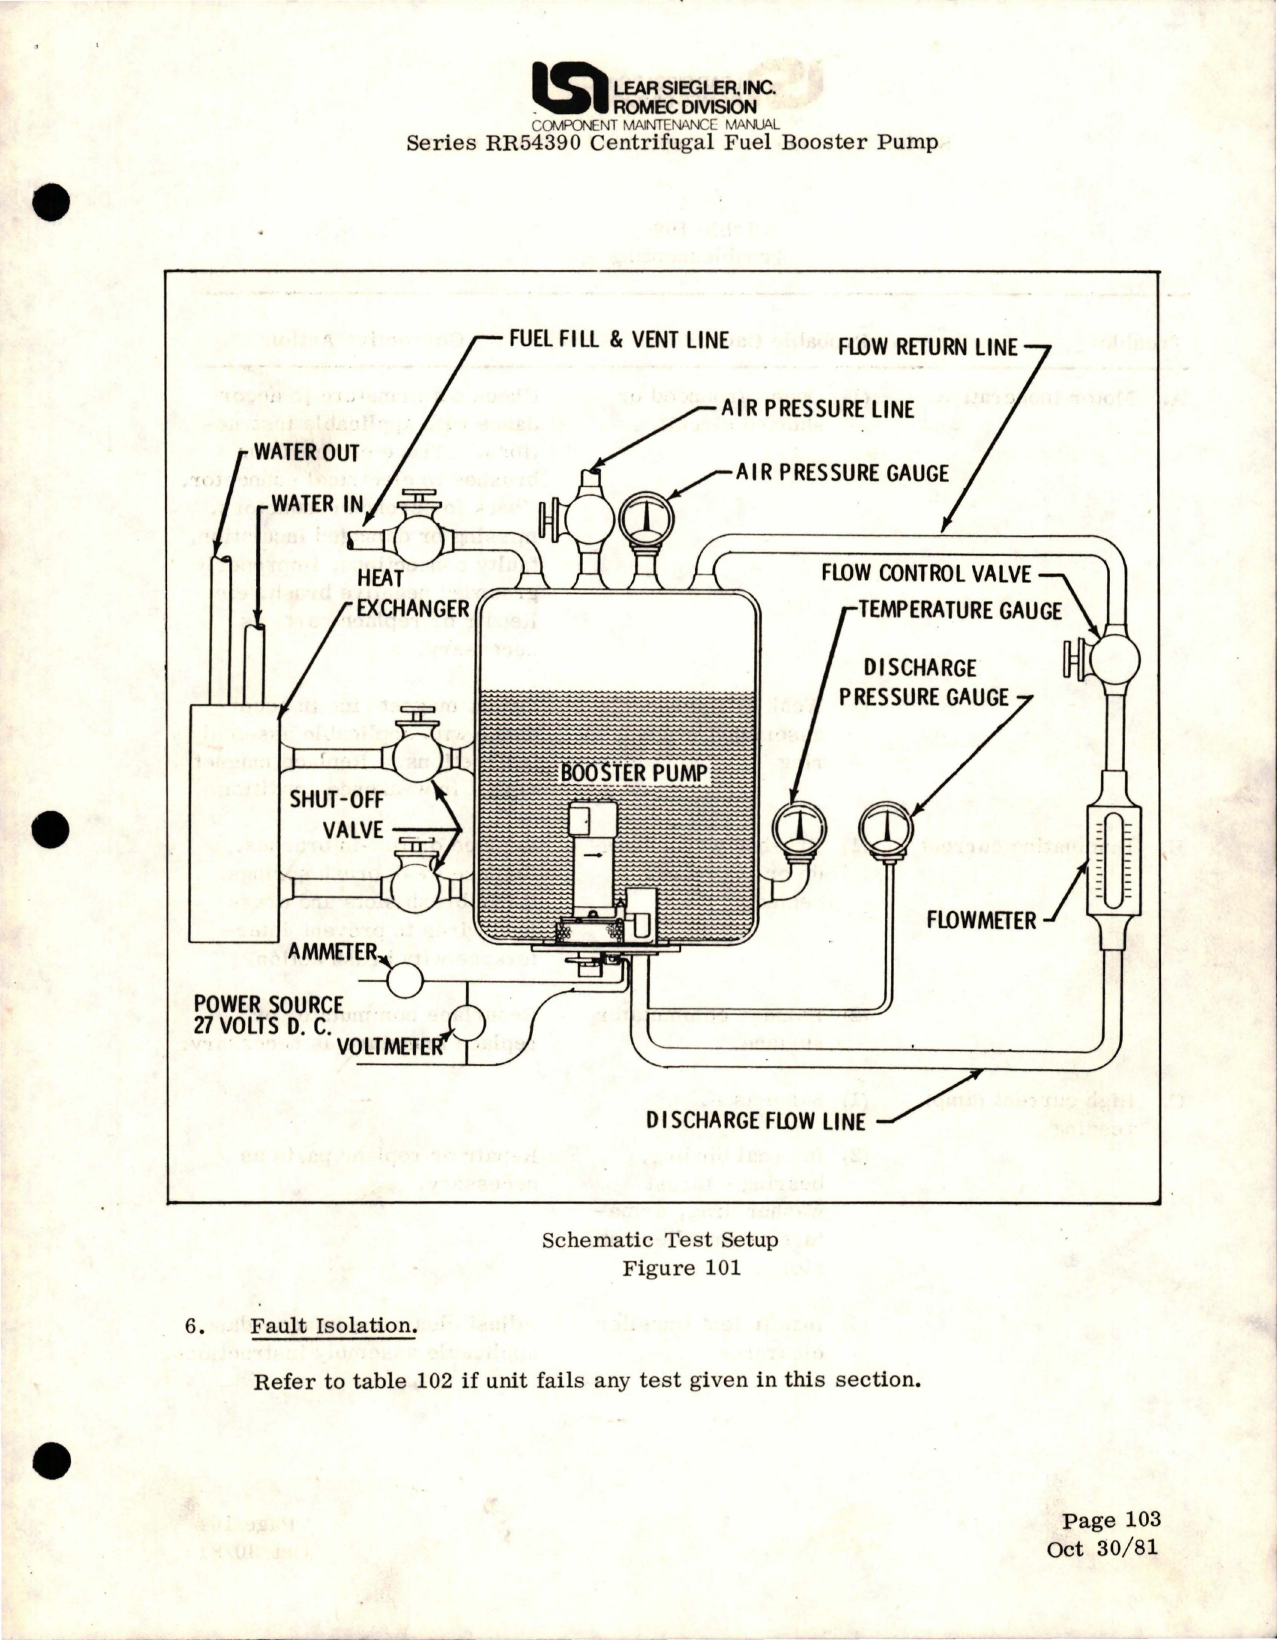 Sample page 9 from AirCorps Library document: Maintenance Manual for Centrifugal Fuel Booster Pump - Series RR54390